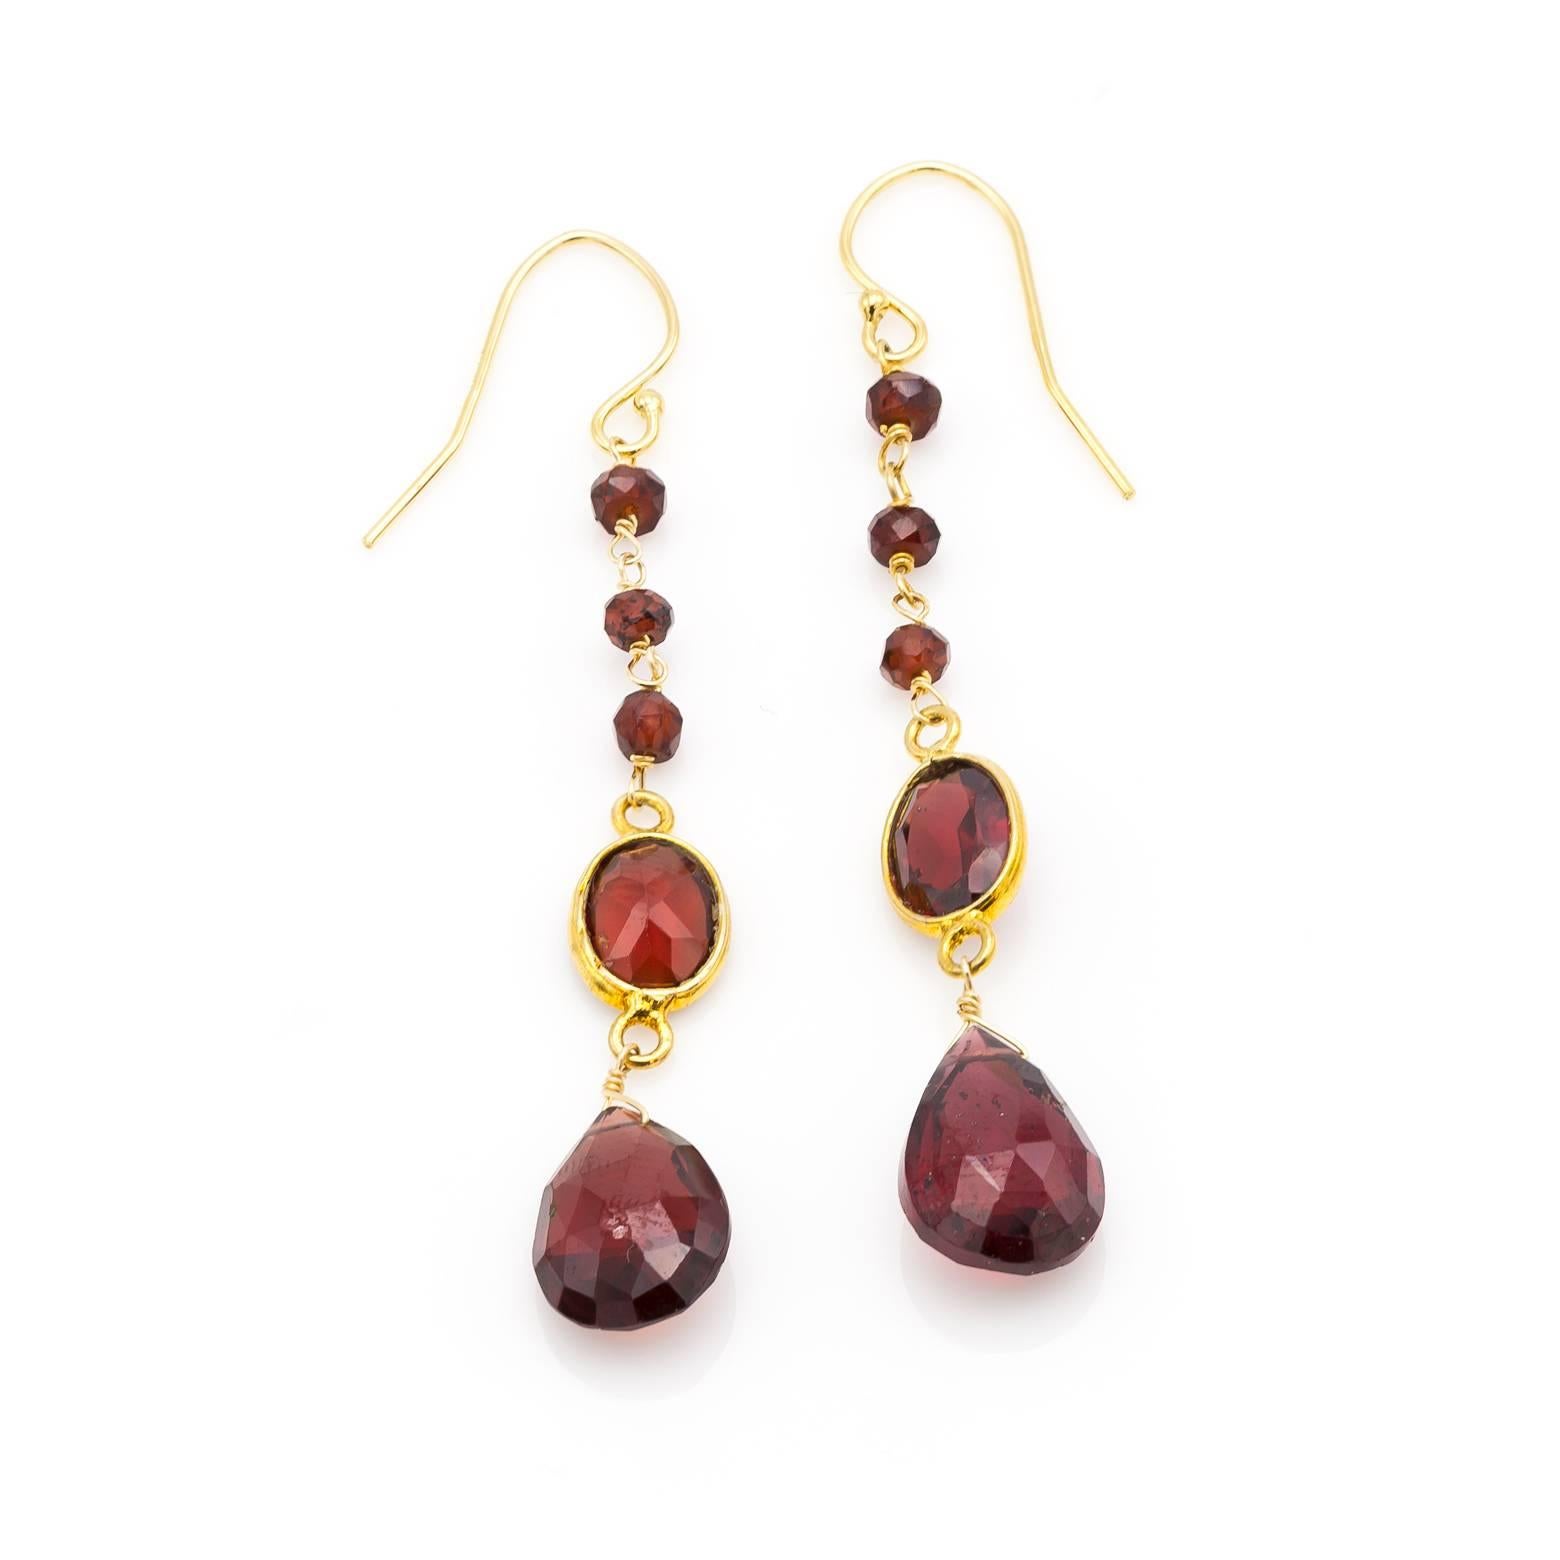 Ten garnets total in these beautiful January birth stone earrings. All faceted crimson garnets in a rich juicy red color held in a beautiful gold. Let the warmth of this stunning color swing and sway while they add elegance and style to your